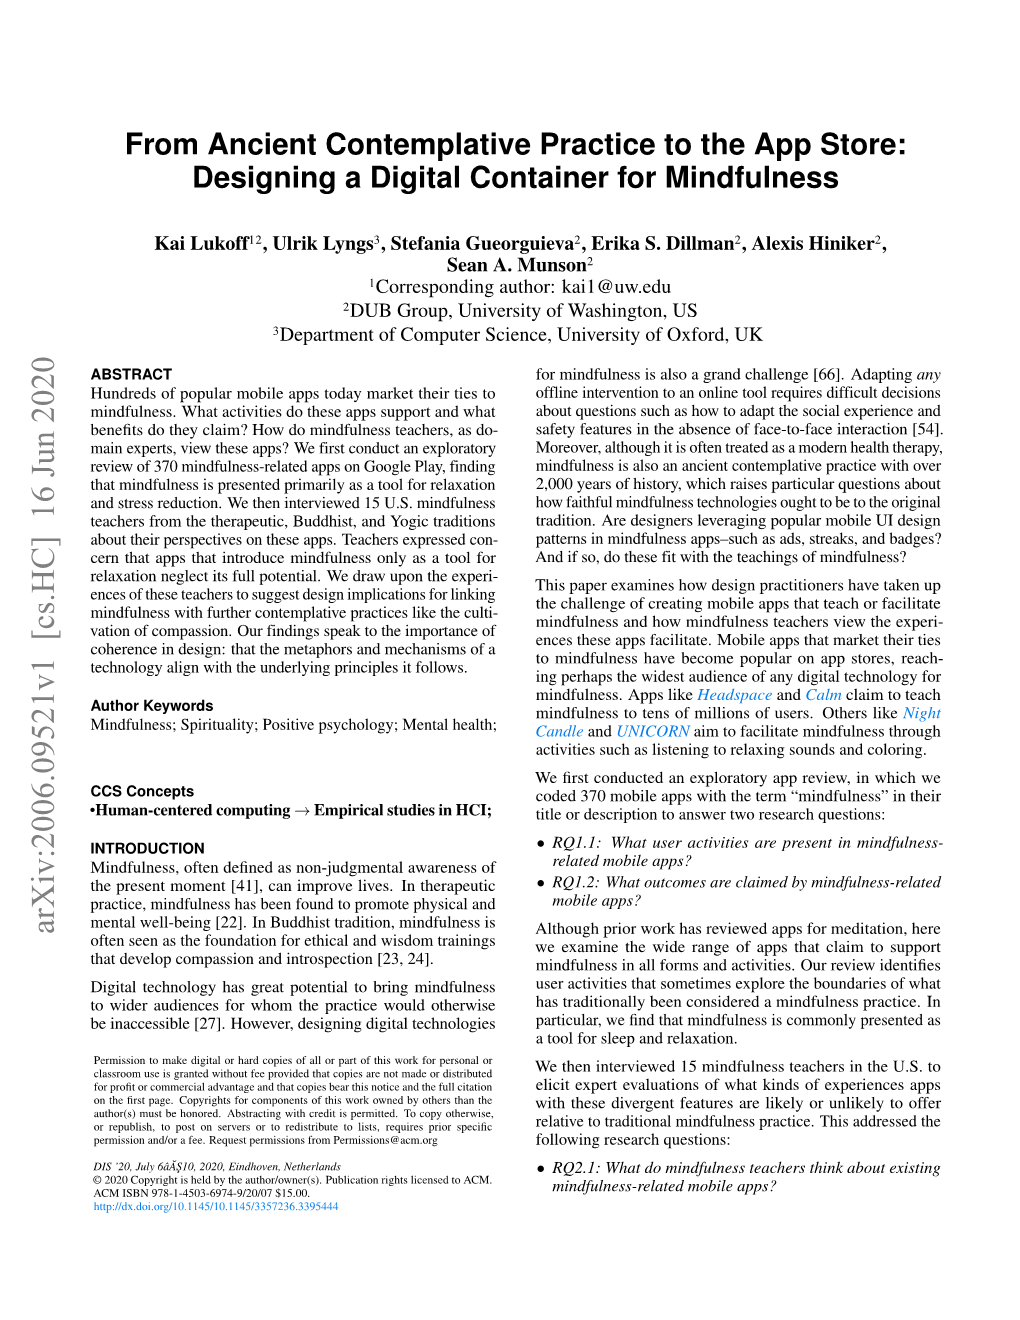 From Ancient Contemplative Practice to the App Store: Designing a Digital Container for Mindfulness